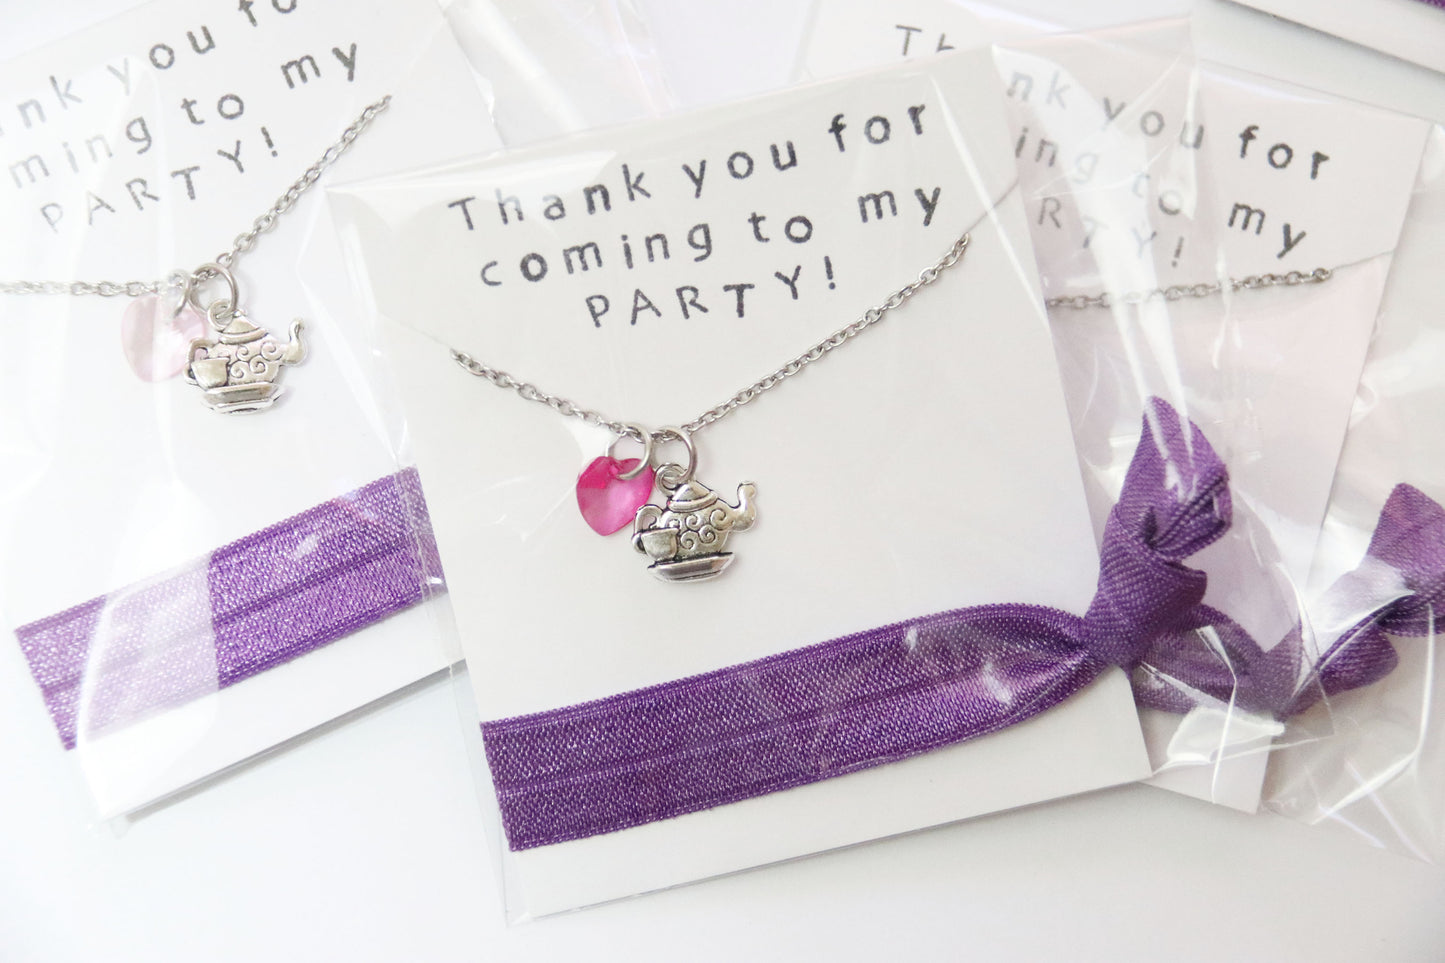 Tea Pot Party Favor Necklace with Hair Tie, Party Favors, Mini Heart and Teapot Charms